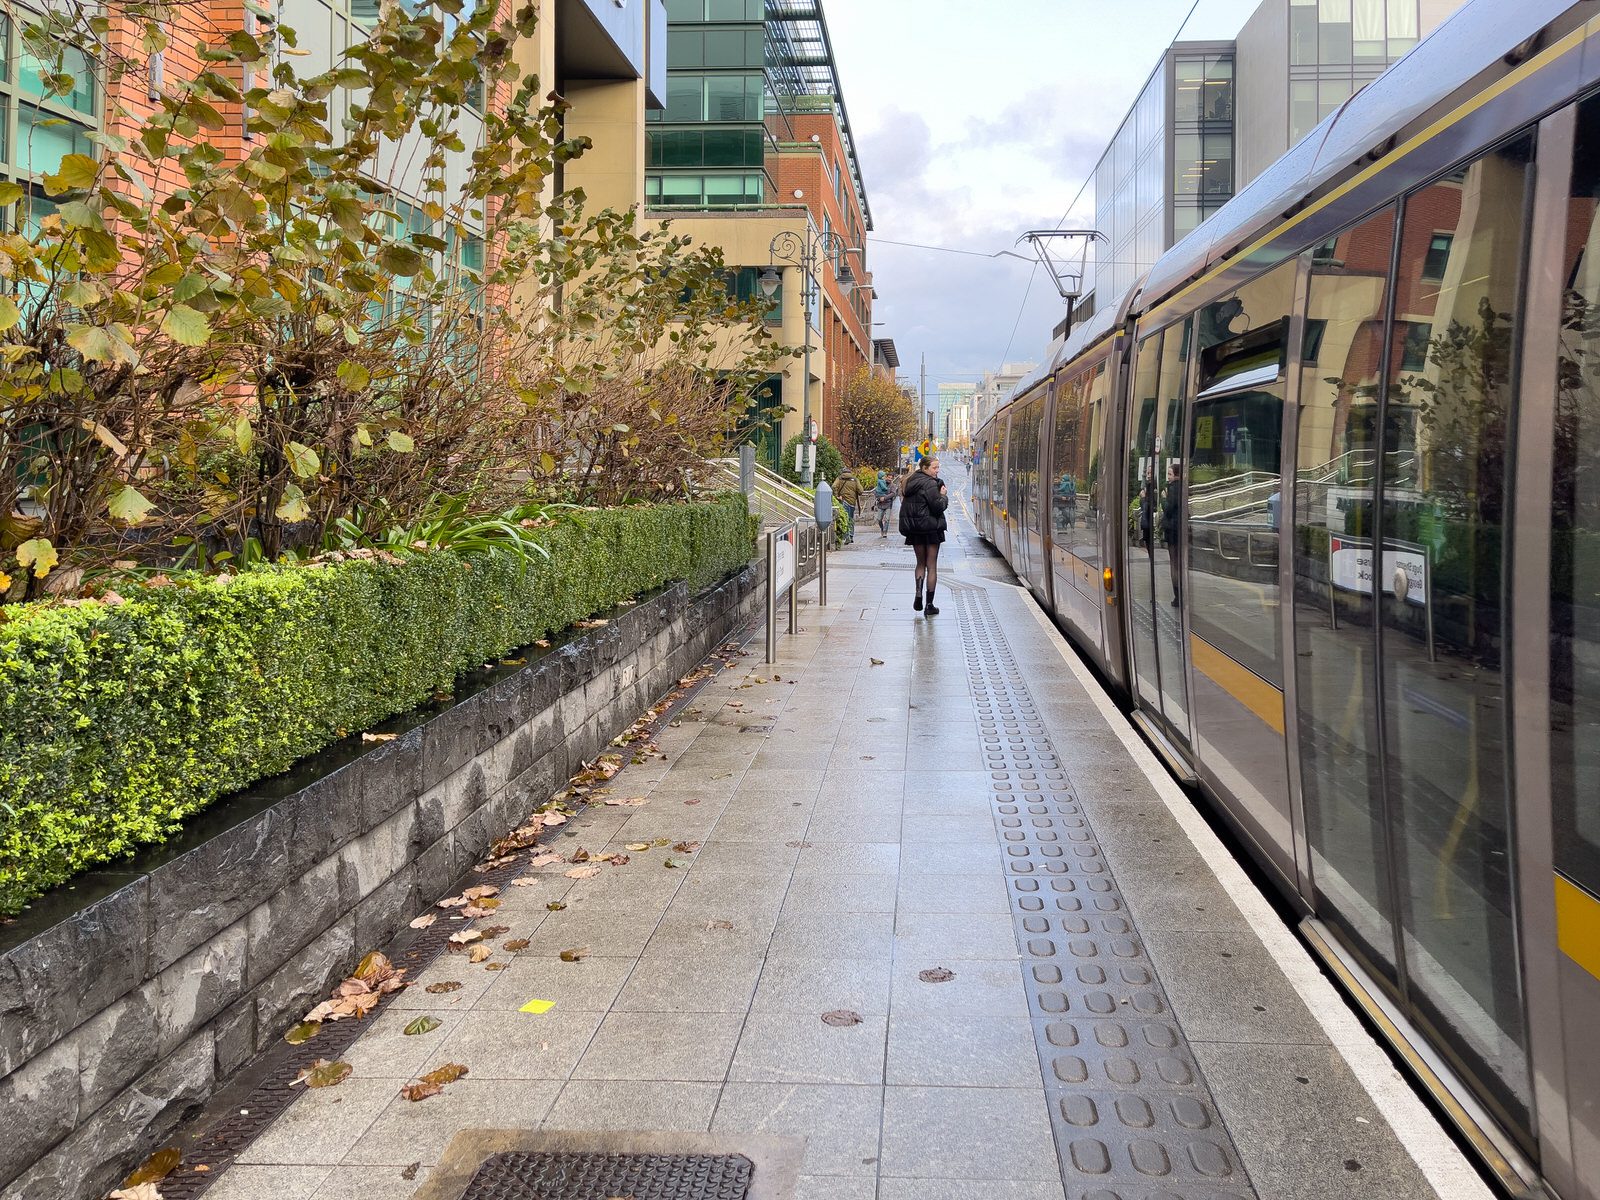 THE LUAS TRAM STOP AT GEORGE'S DOCK 003